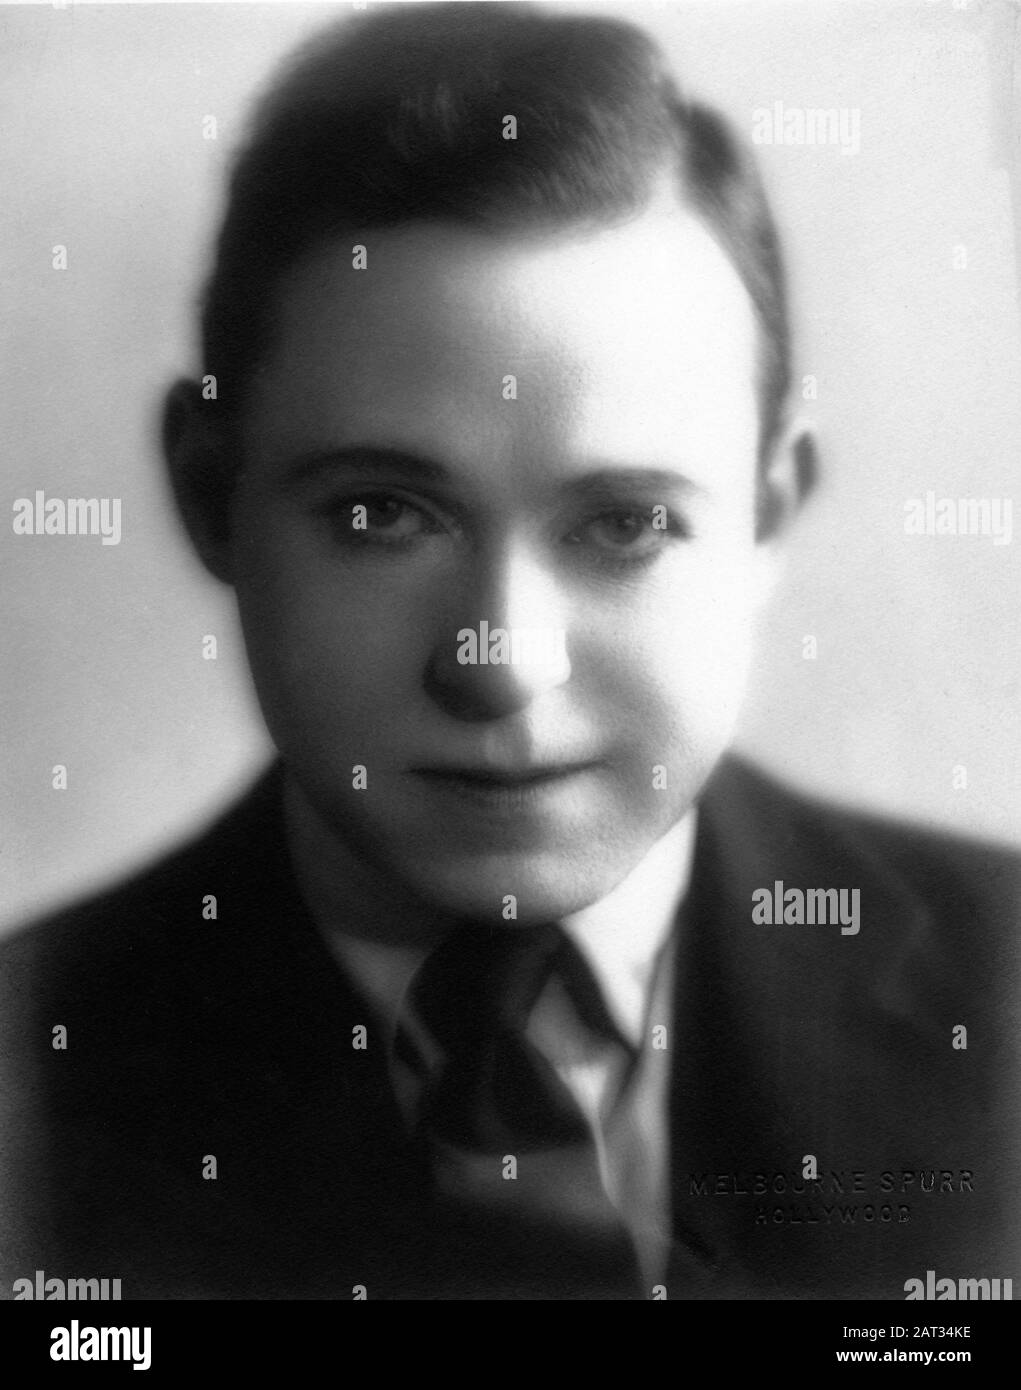 Silent Movie Comedian HARRY LANGDON circa 1926 Portrait by MELBOURNE SPURR Publicity for First National Pictures Stock Photo